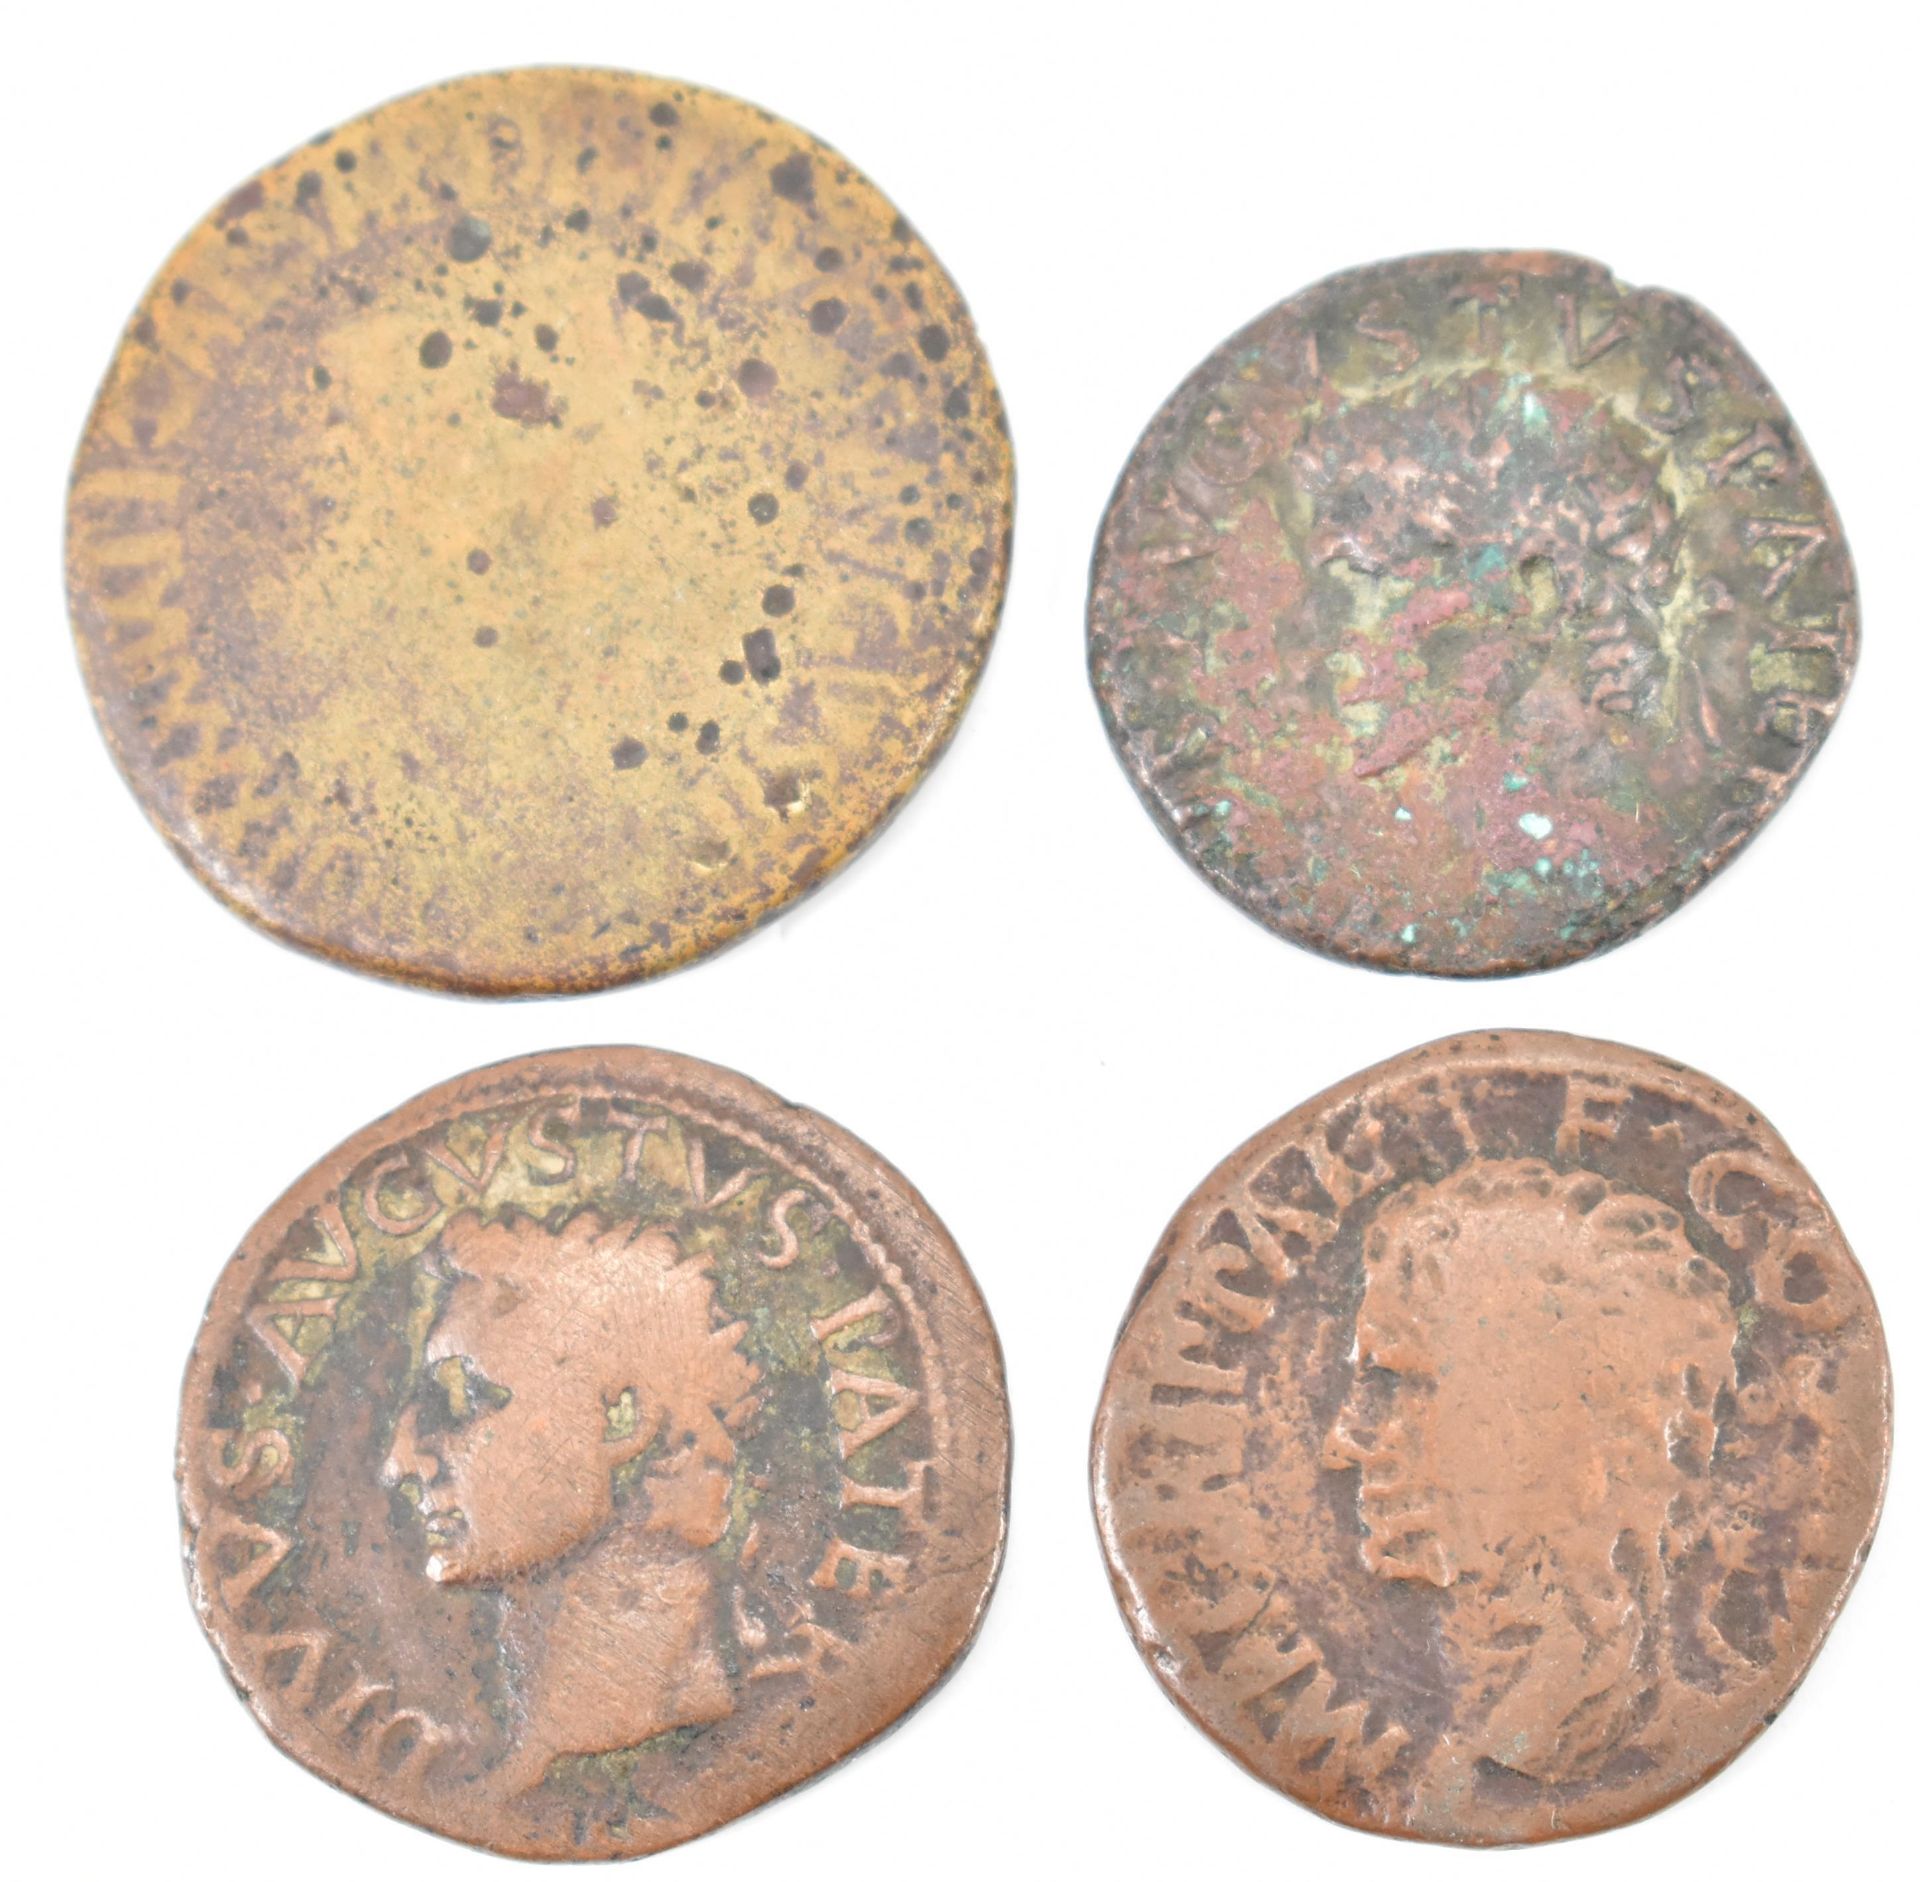 FOUR ROMAN IMPERIAL COINS FROM THE REIGN OF TIBERIUS